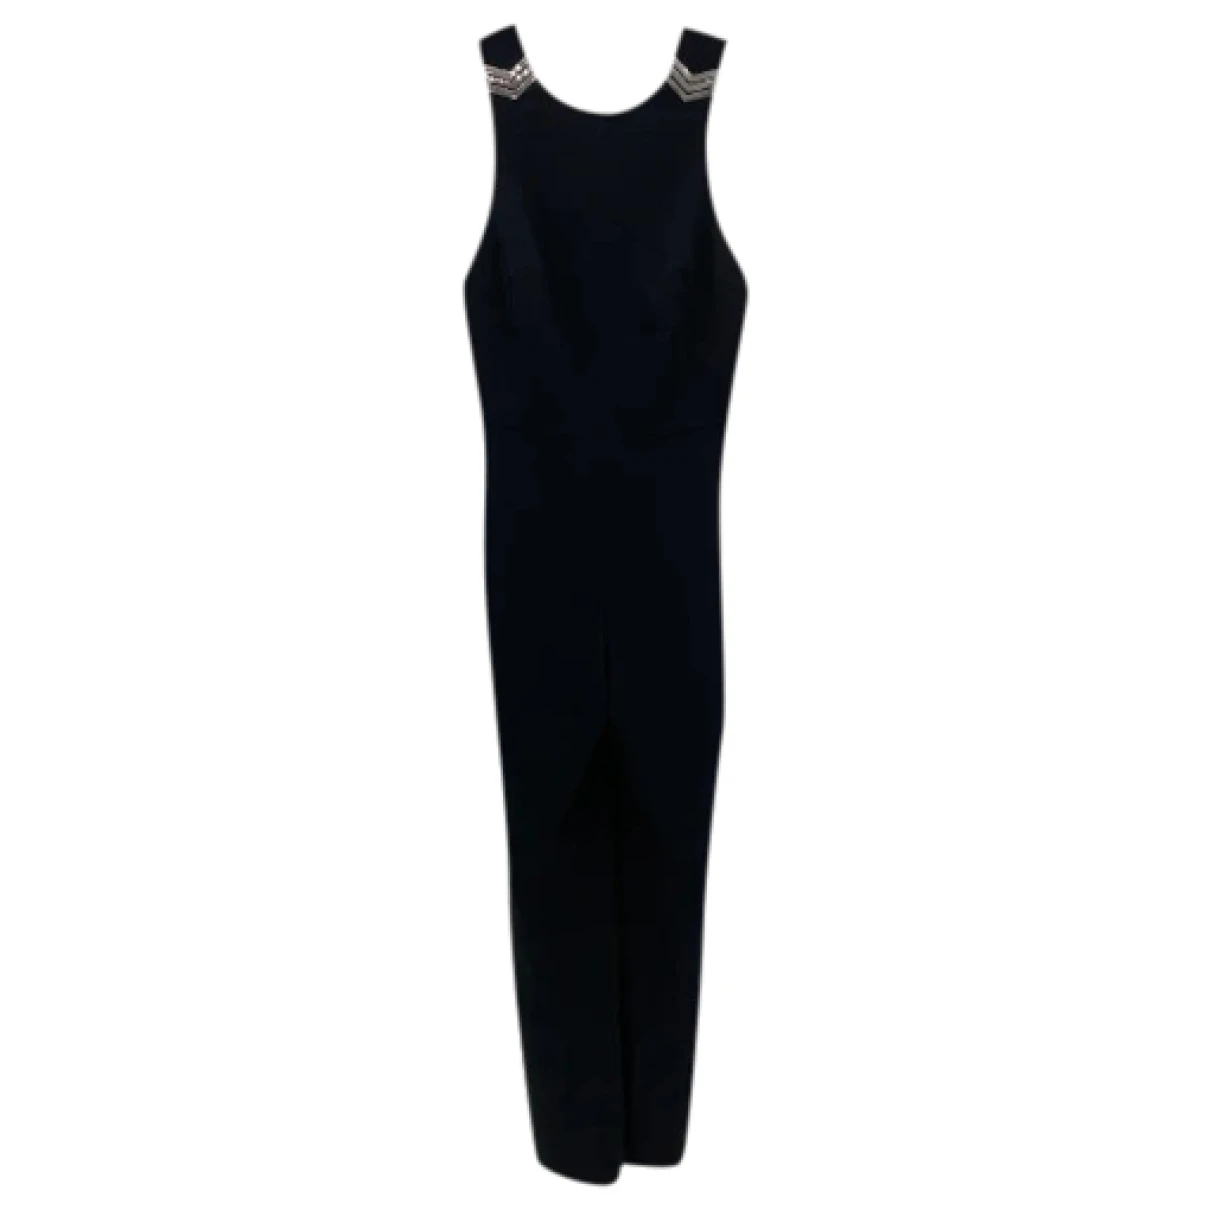 clothing Mugler jumpsuits for Female Viscose 40 FR. Used condition